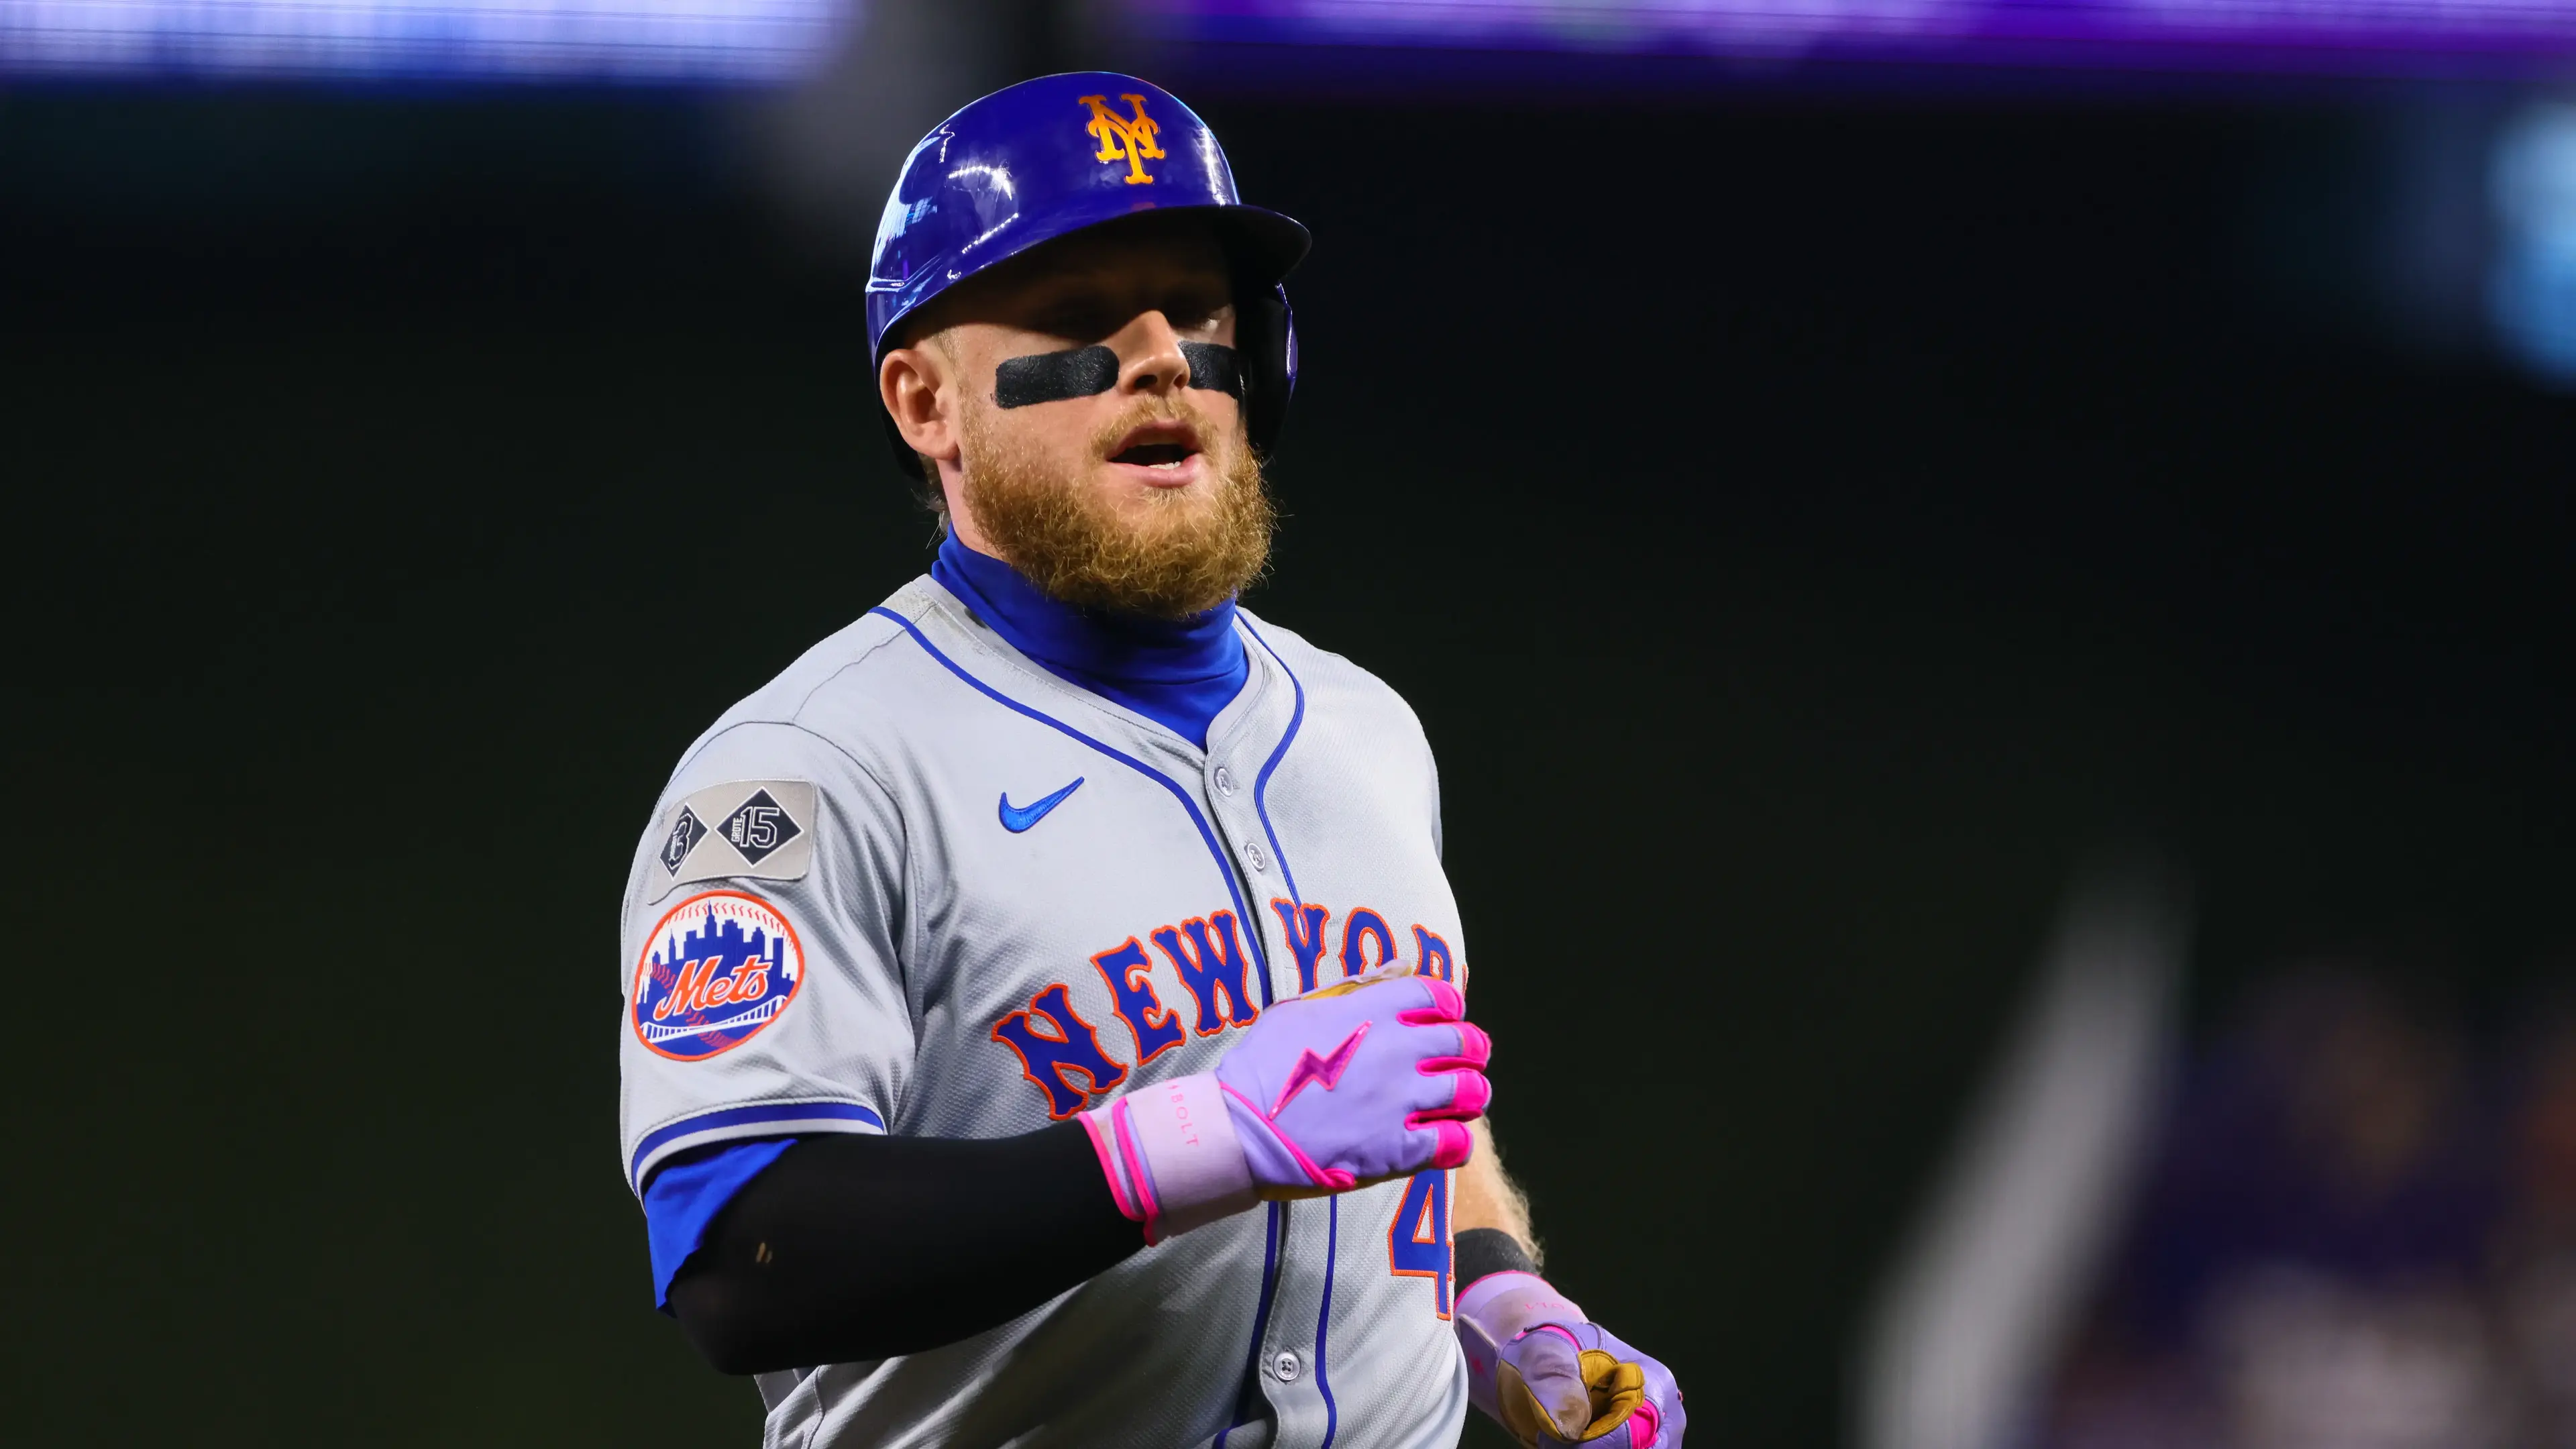 Harrison Bader remains out of Mets lineup, hopeful to return soon